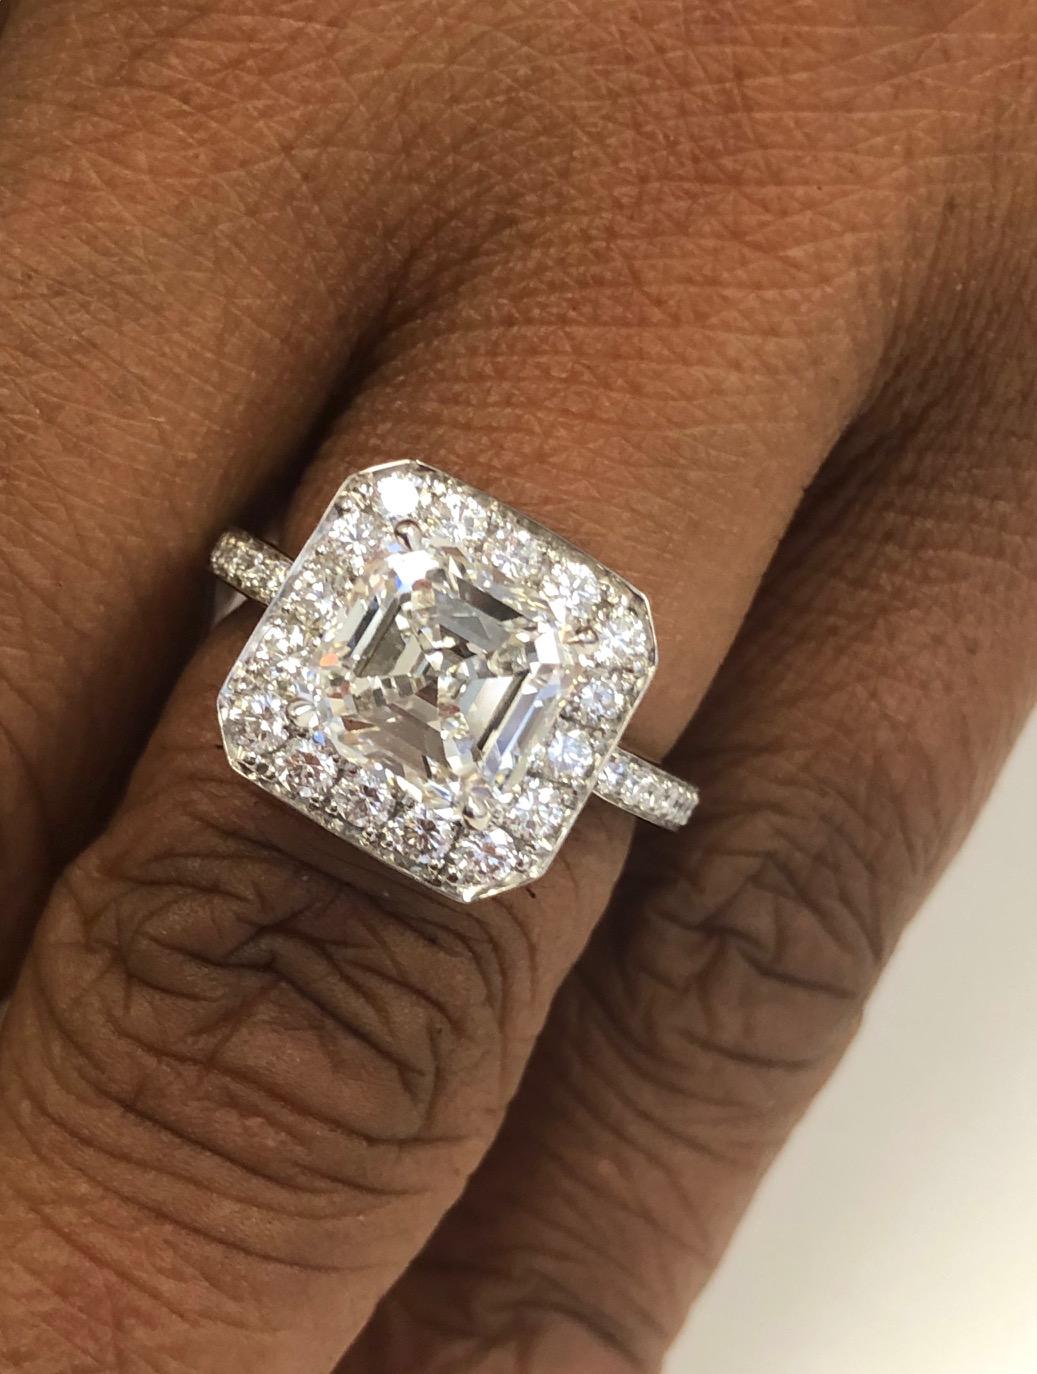 Excellent quality Platinum Diamond Ring, set with a fine Asscher Cut center Diamond 3.01 carats, FVS1 with GIA report and 34 round diamonds 0.80 carats.

We design and manufacture all our jewelry in our workshop, located in New York City's diamond